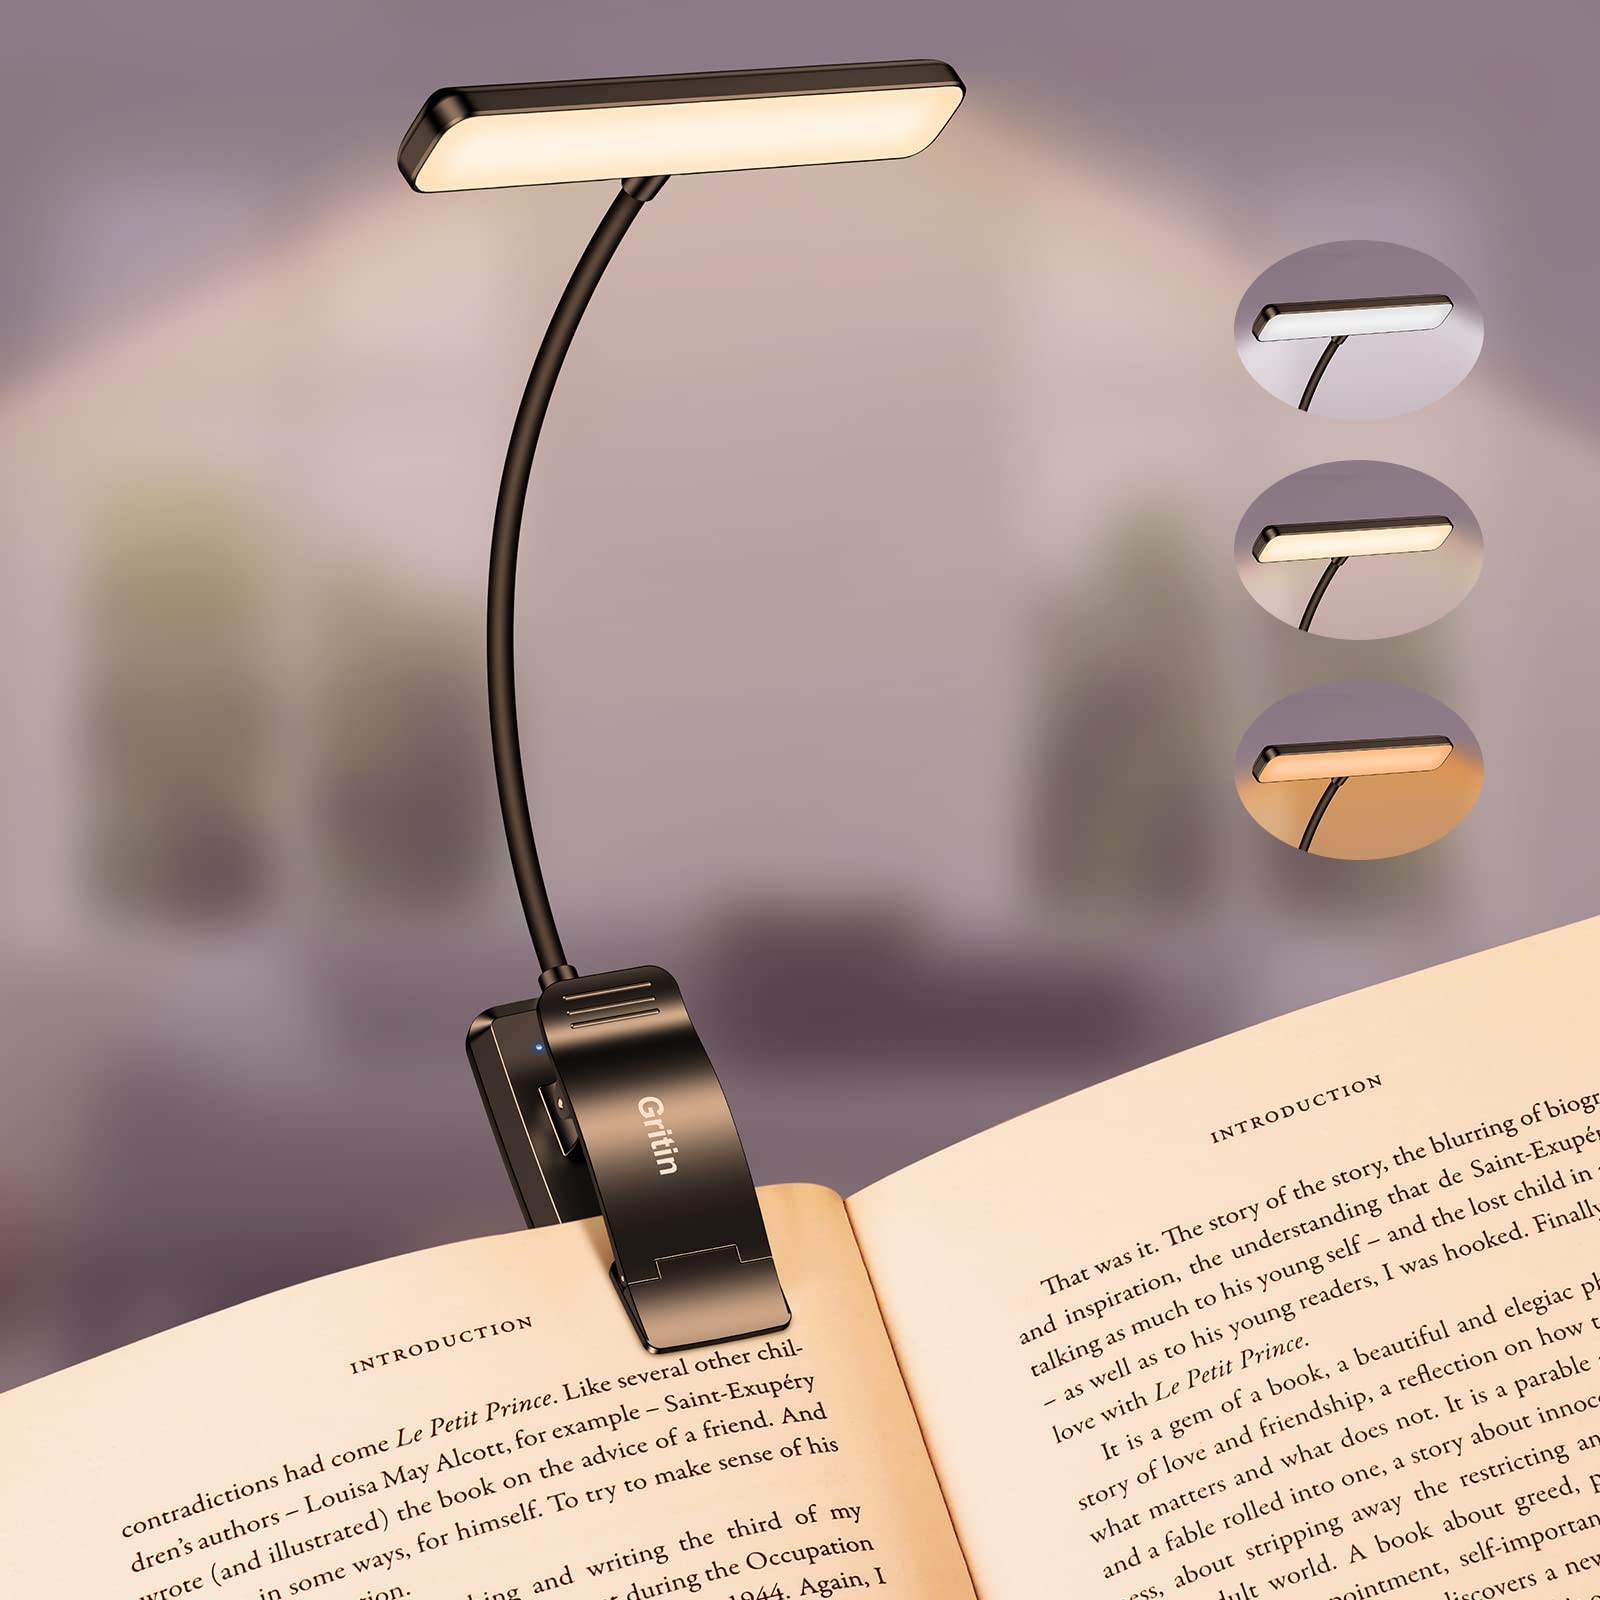 Gritin 19 LED Rechargeable Book Light for Reading in Bed with Memory Function